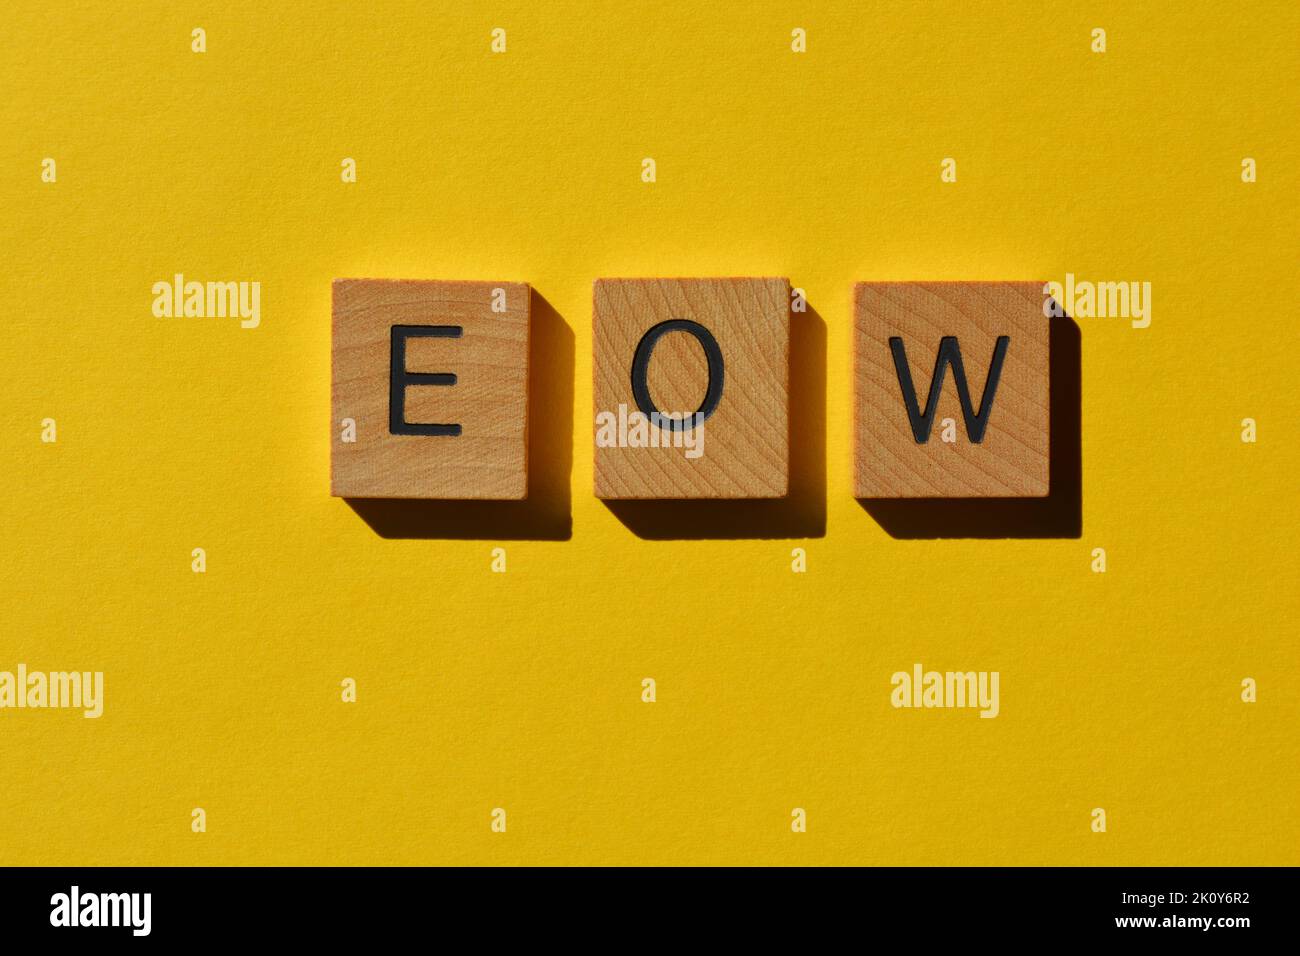 E O W, abbreviation used in text speak for End Of Week, wooden alphabet letters on bright yellow background Stock Photo